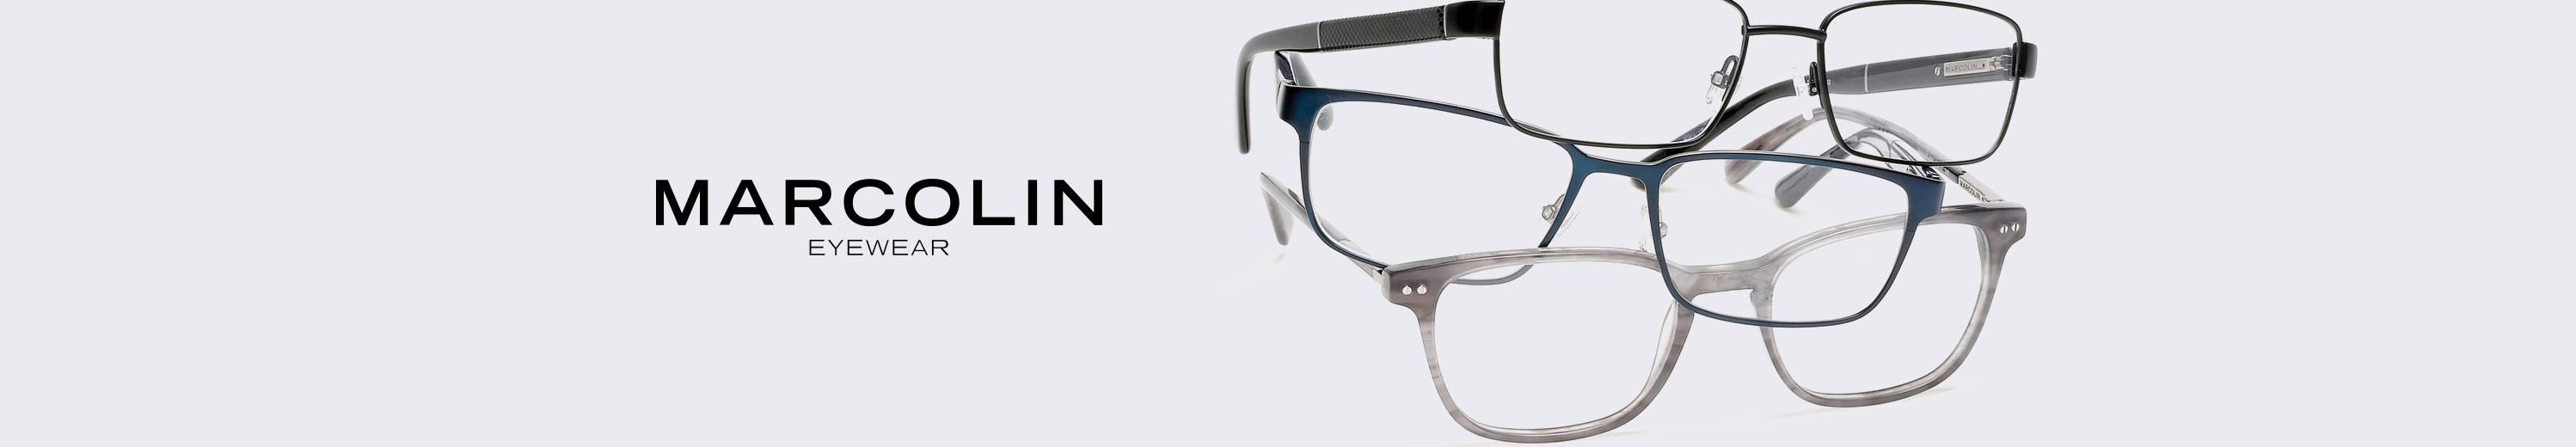 Marcolin Glasses and Eyewear